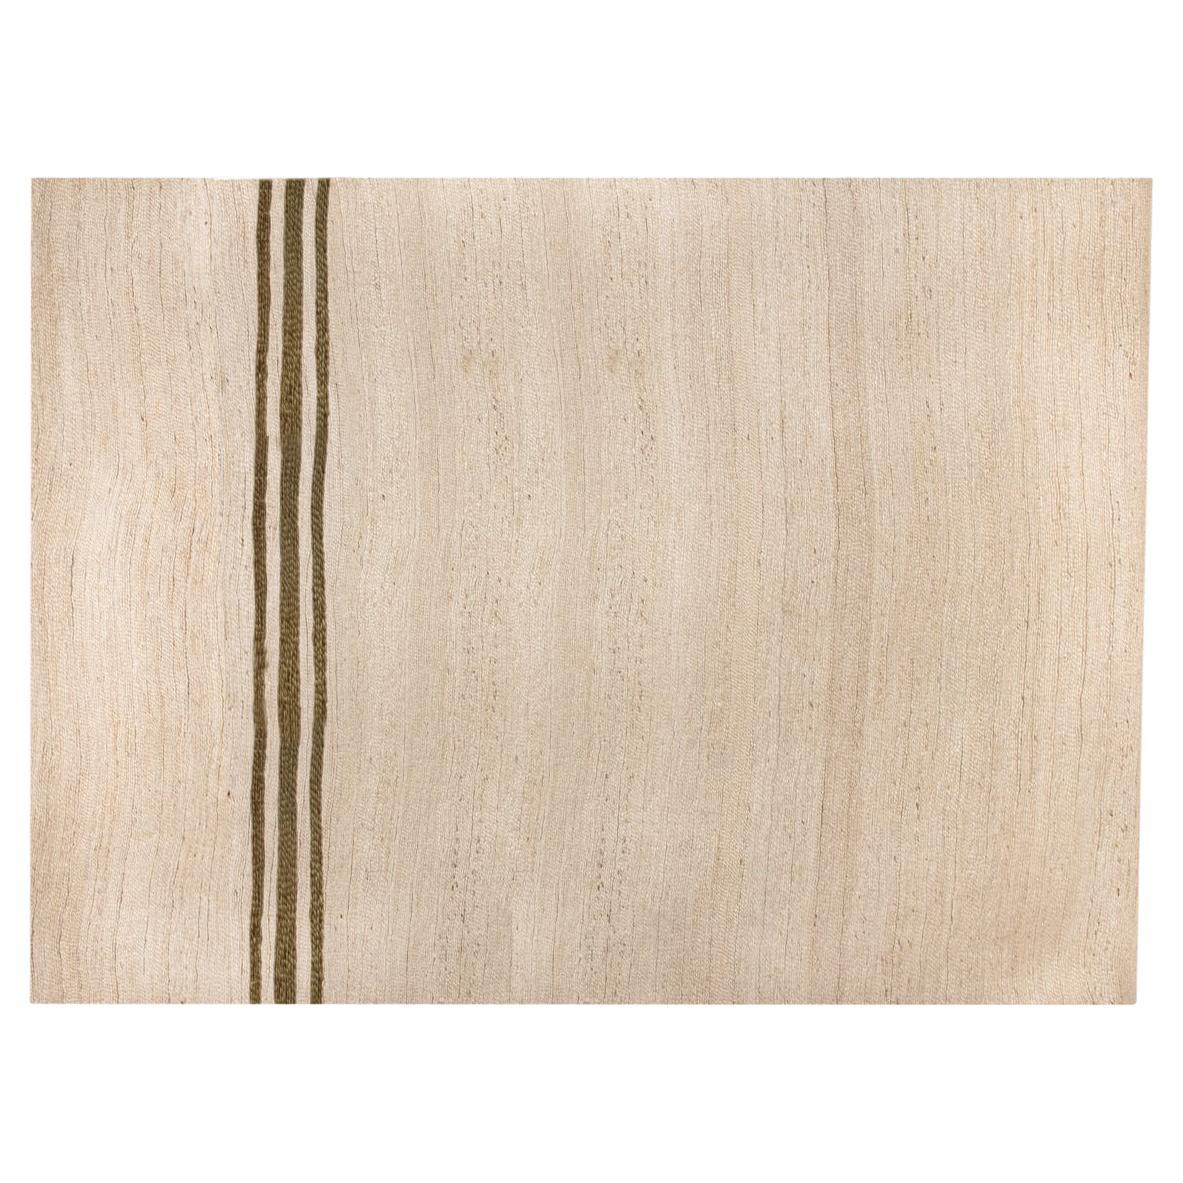 Modern Hand stitched Jute Carpet Rug Provenza Green Stripes & Ivory For Sale